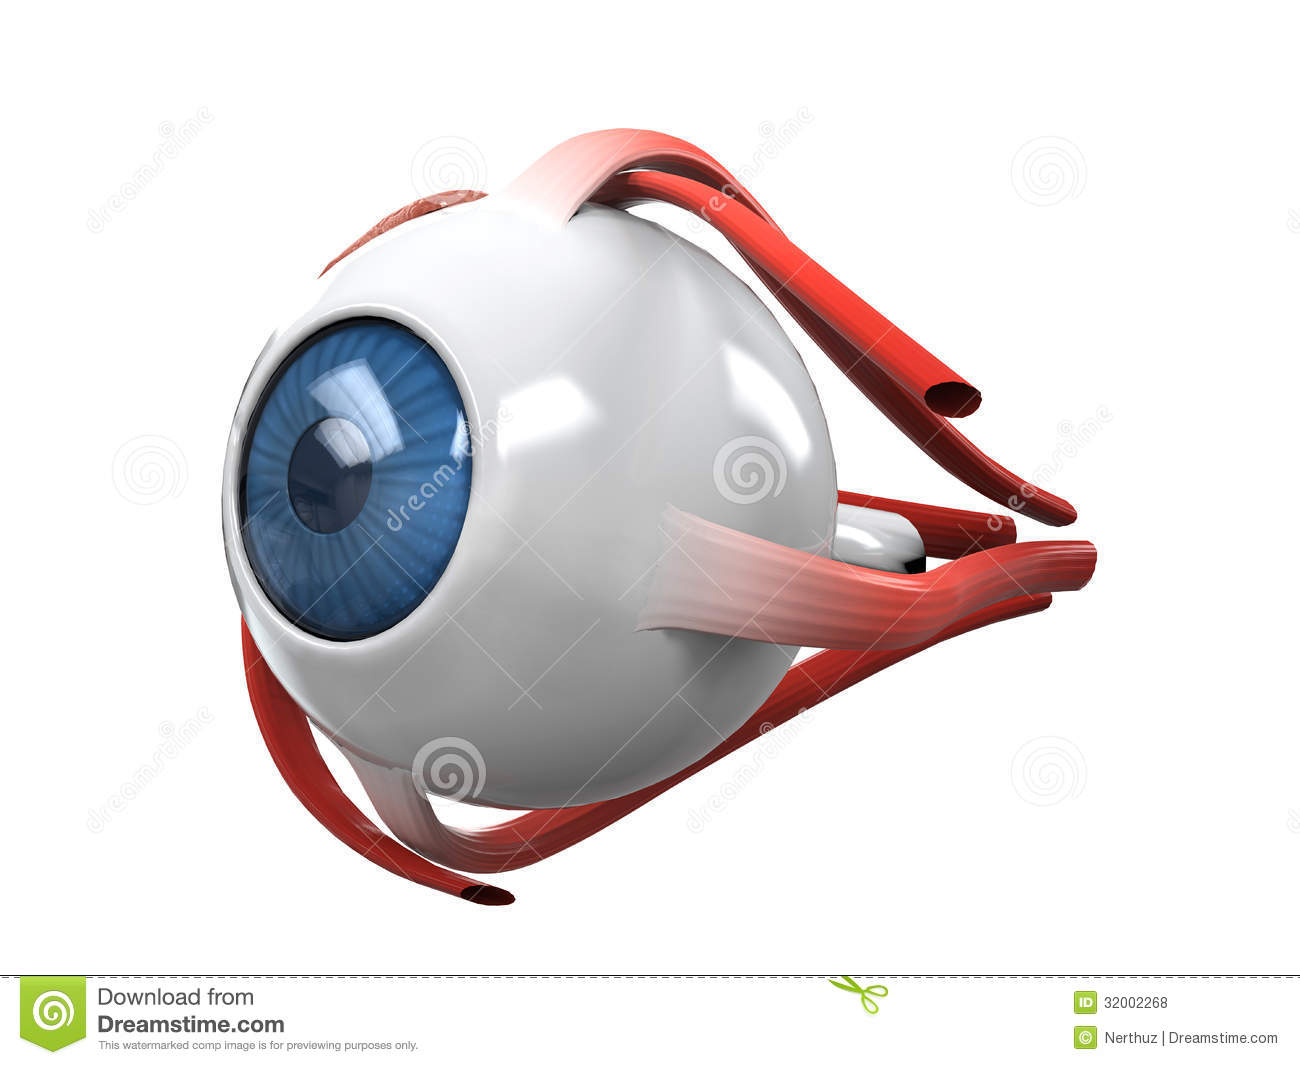 Human Eye Dissection Anatomy Isolated On White Background  3d Render